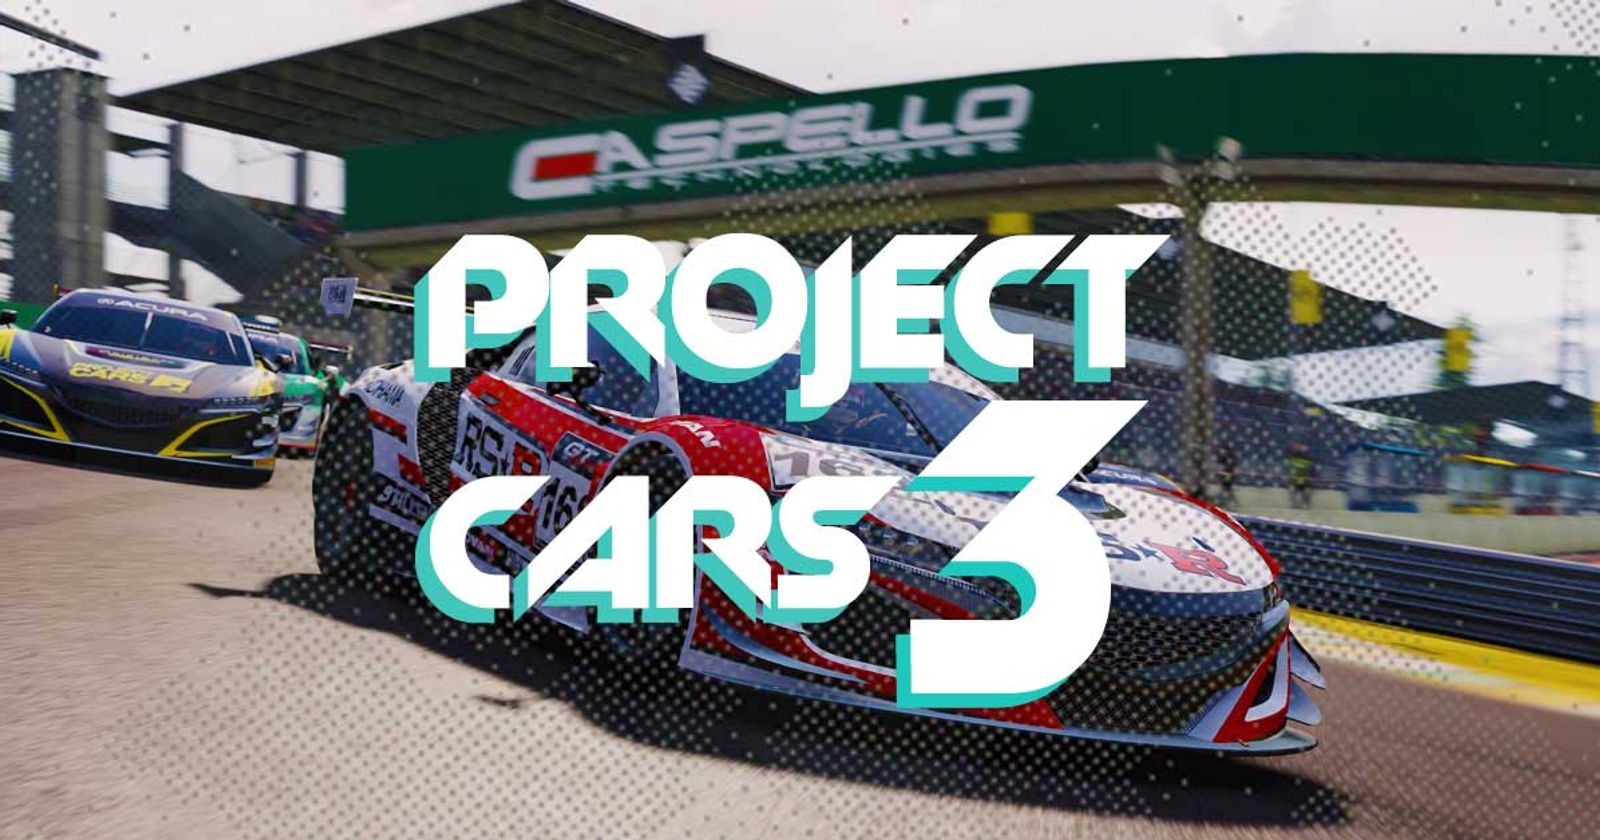 Project Cars 3 - Official Trailer 